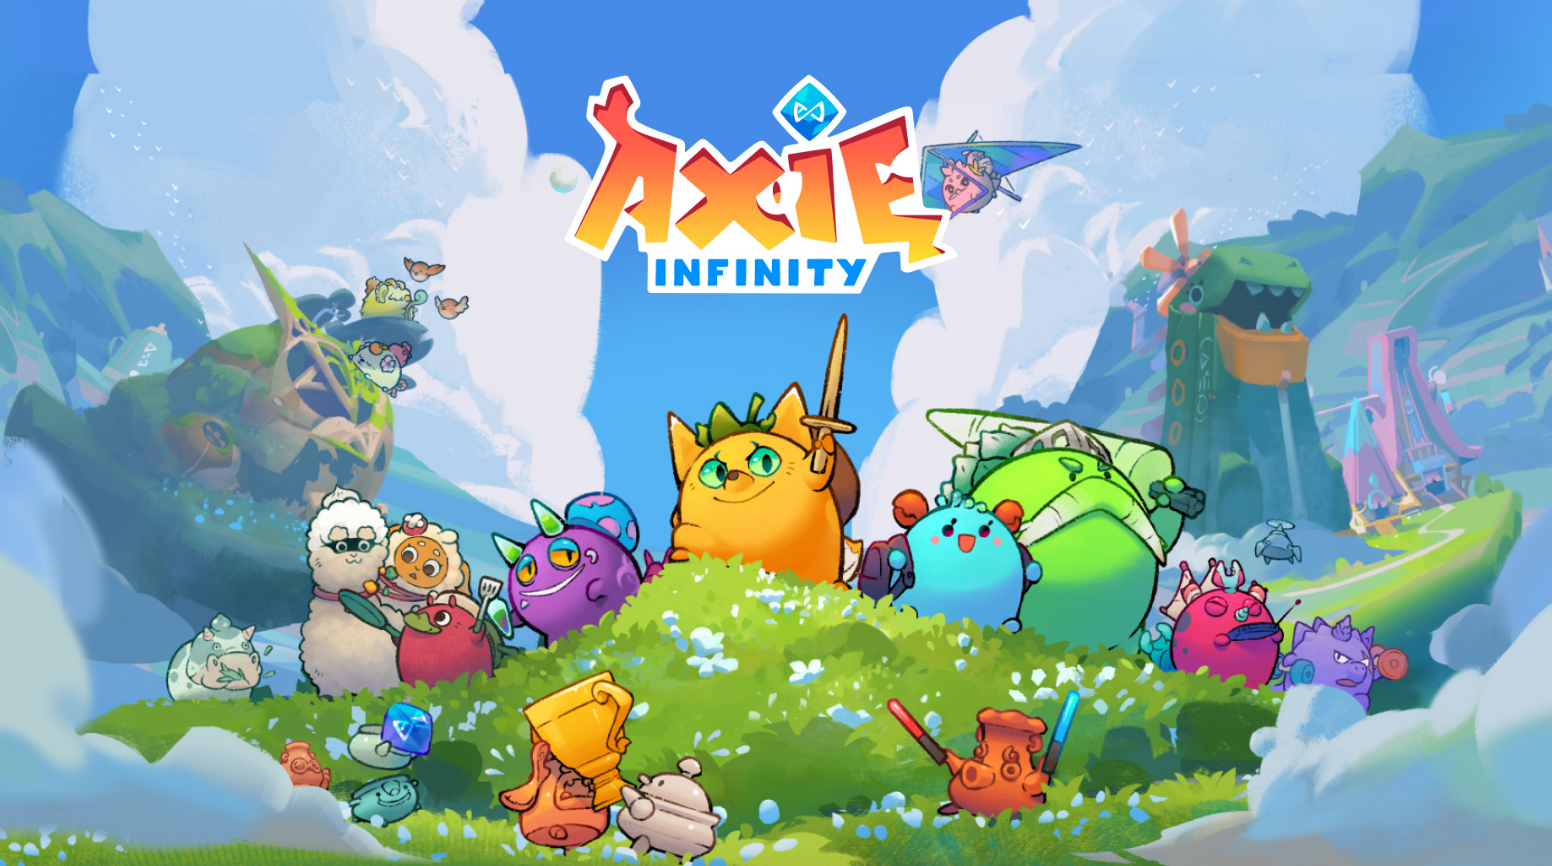 Axie Infinity nft project